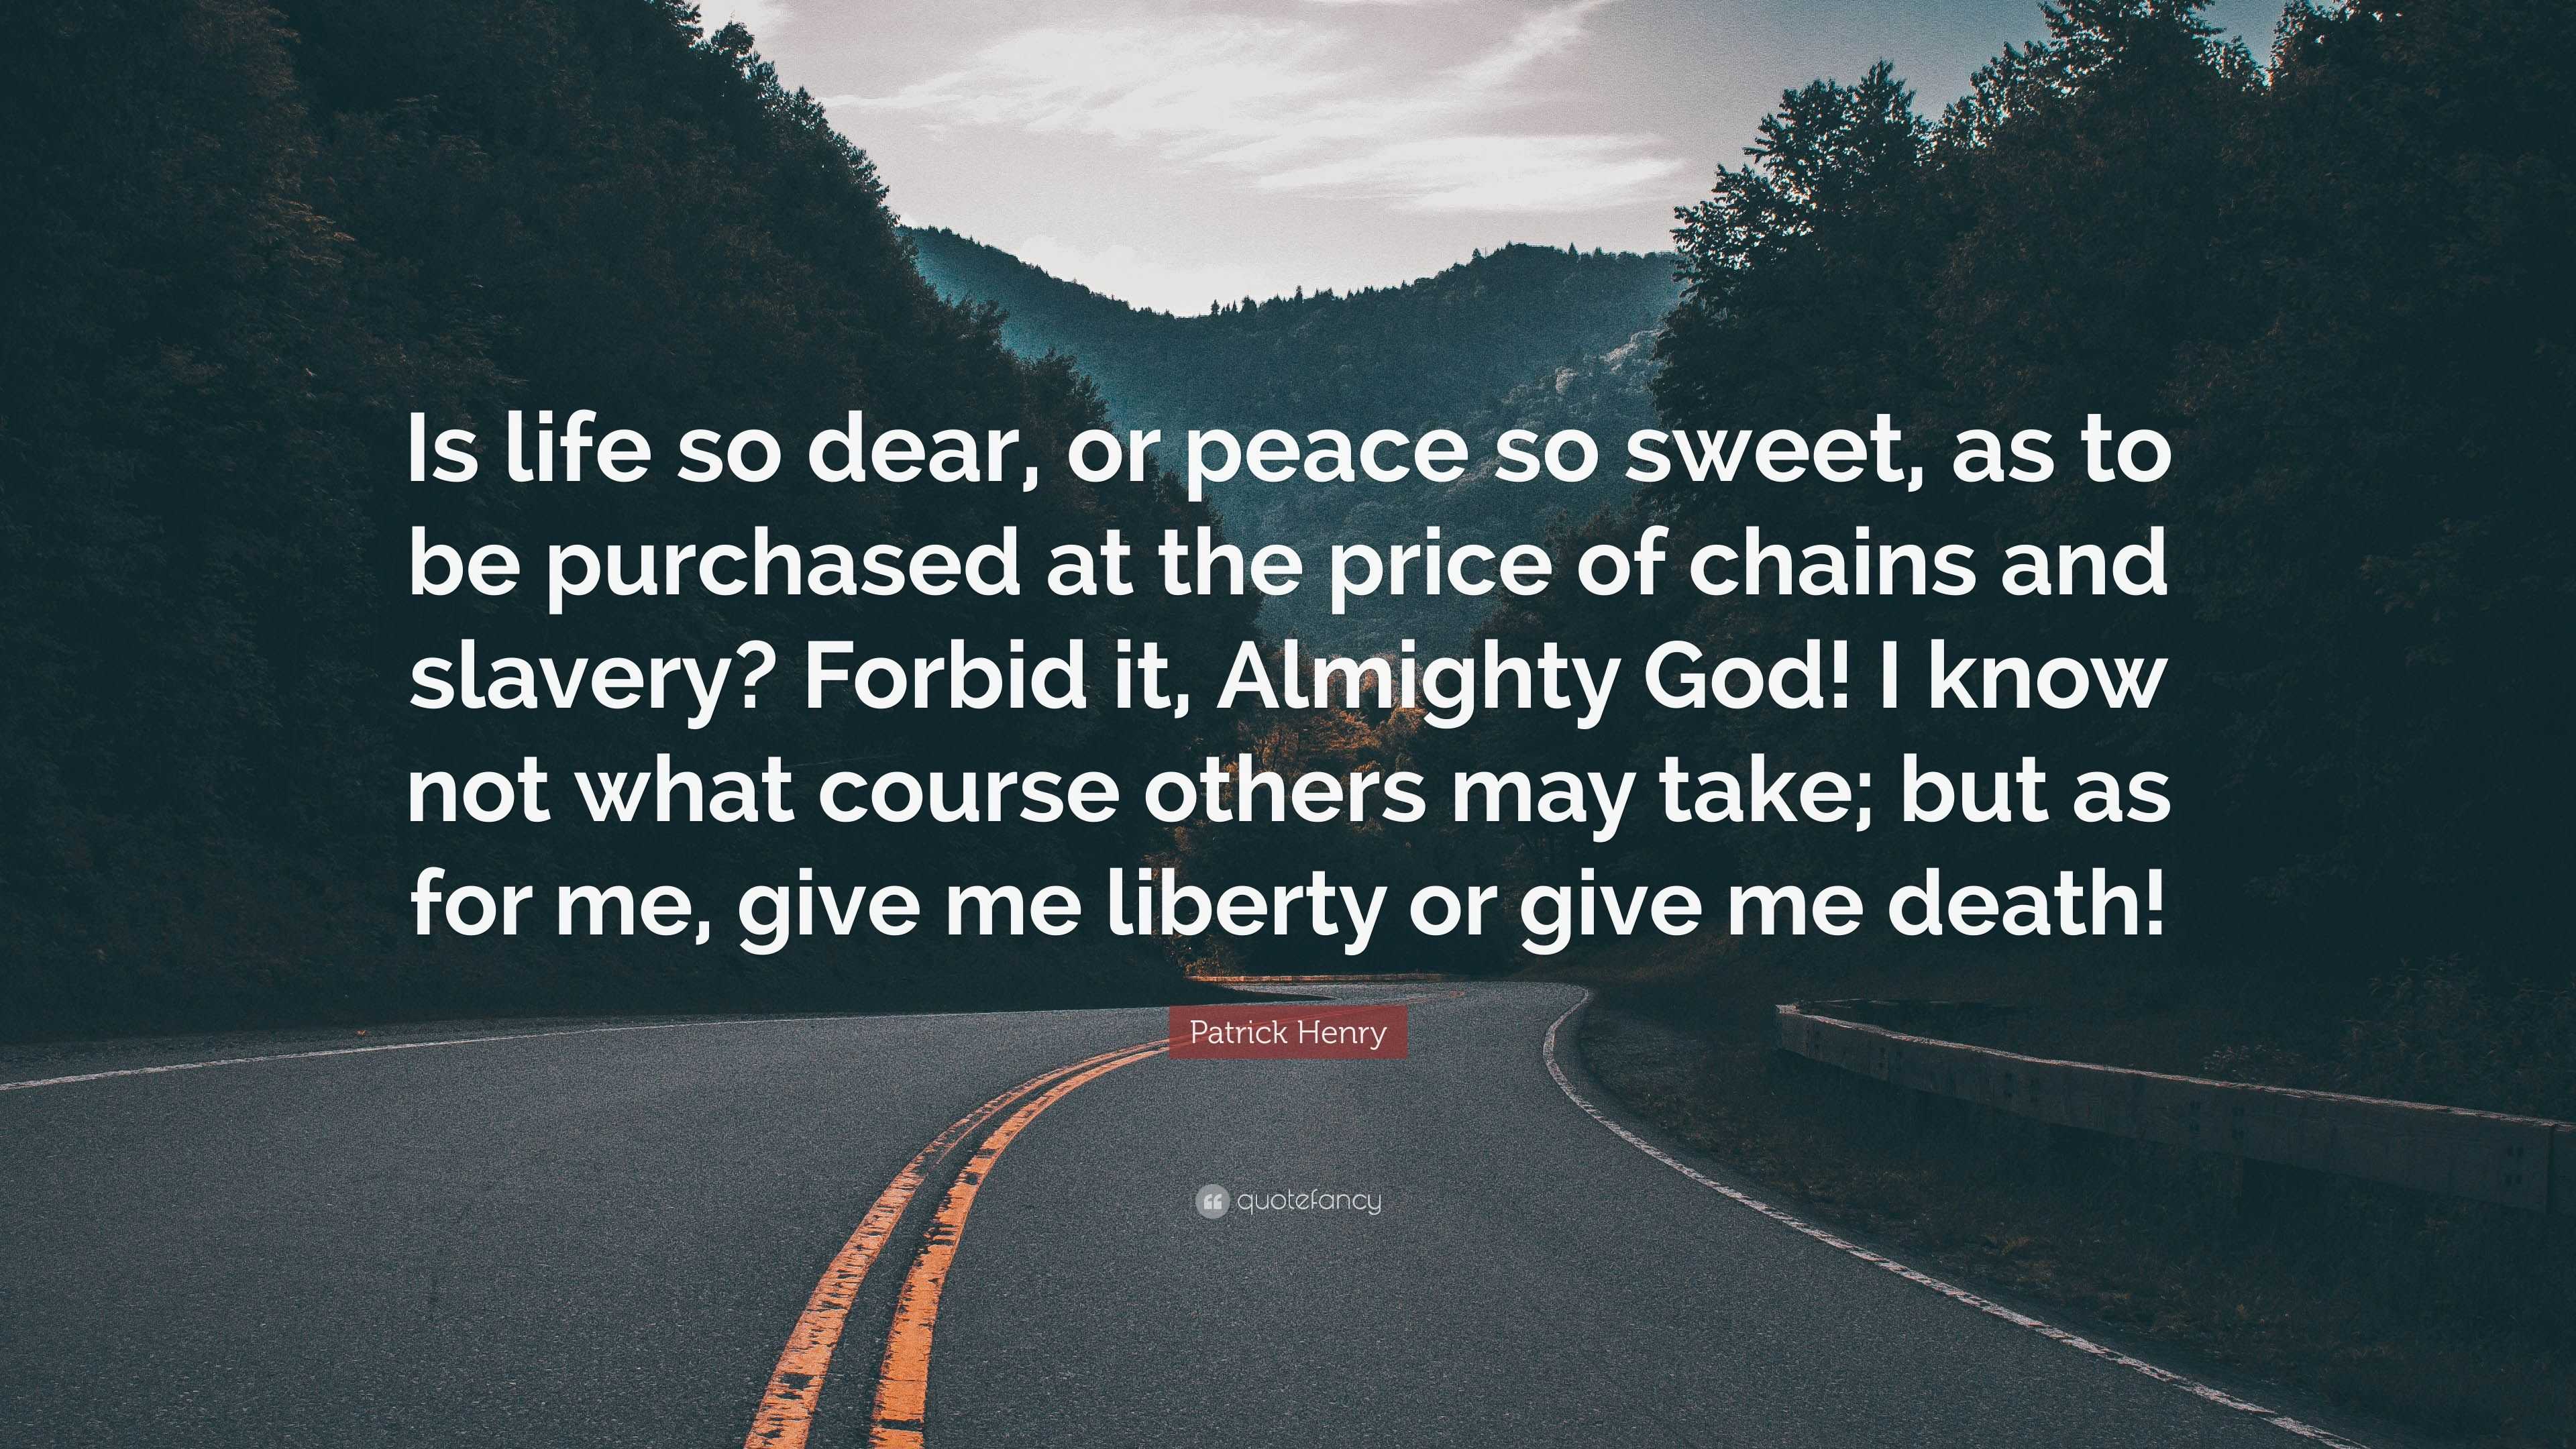 what is life quote patrick henry quote u201cis life so dear or peace so sweet as to be